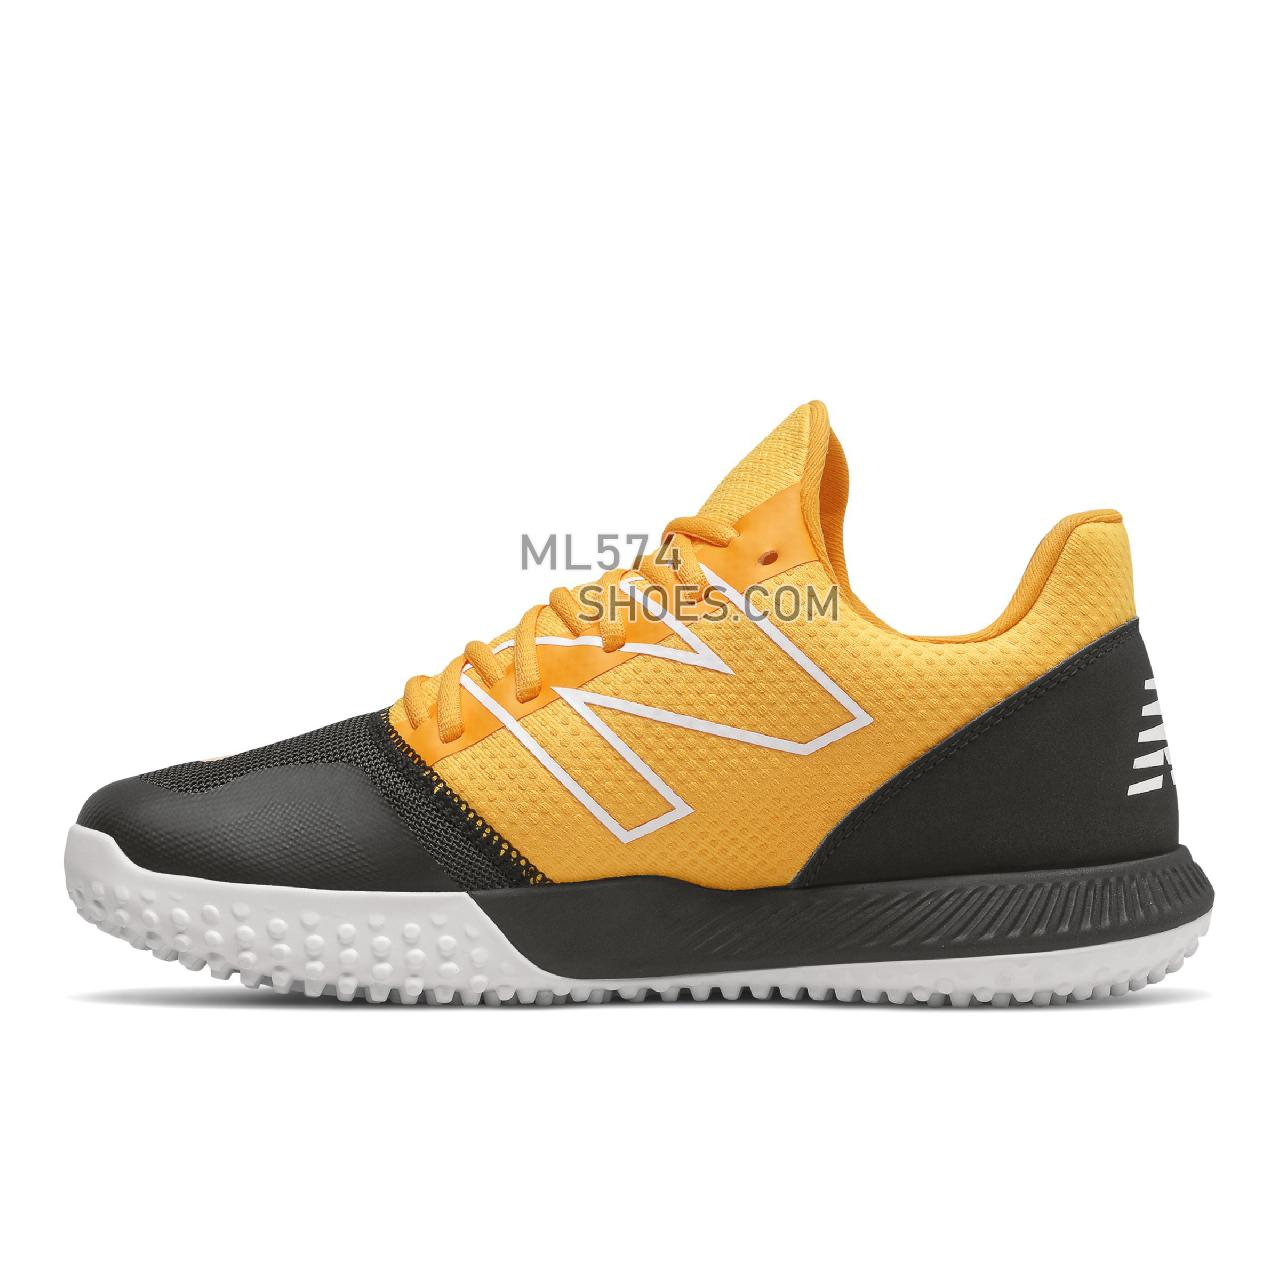 New Balance FuelCell 4040 v6 Turf Trainer - Men's Baseball Turf - Black with Yellow - T4040BY6